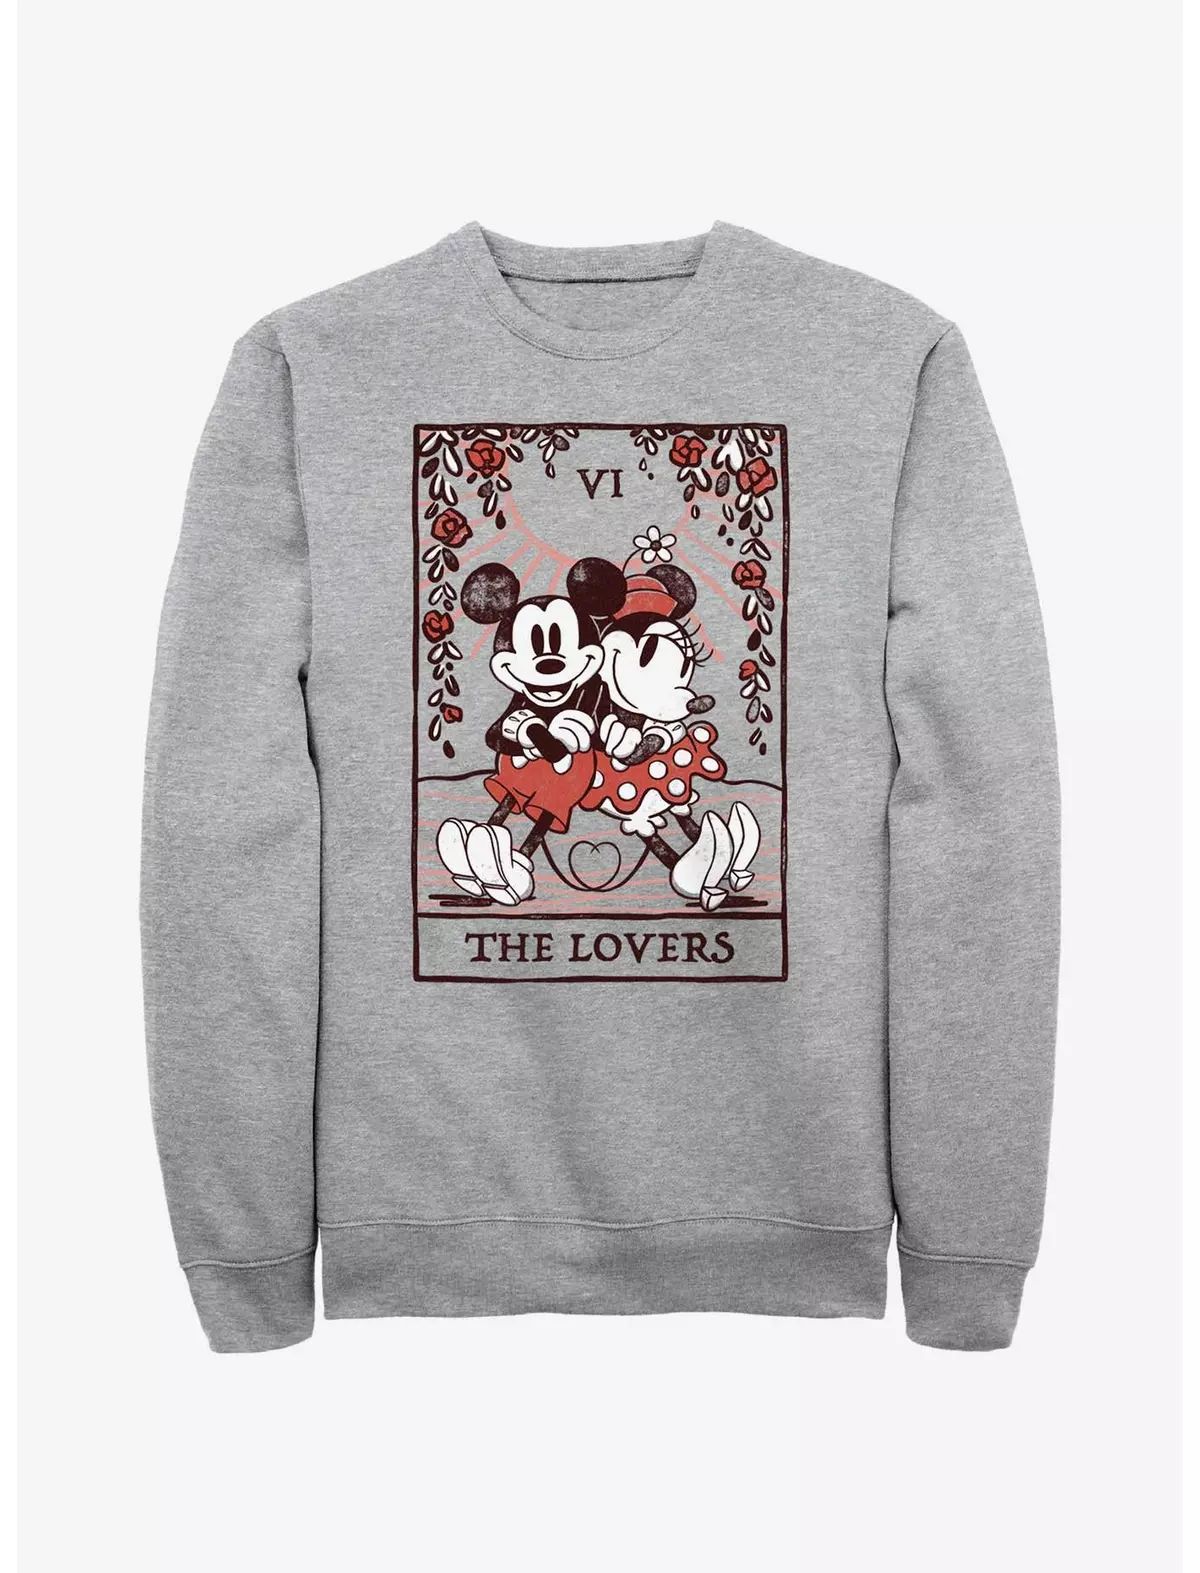 Disney Mickey Mouse & Minnie Mouse The Lovers Sweatshirt | Hot Topic